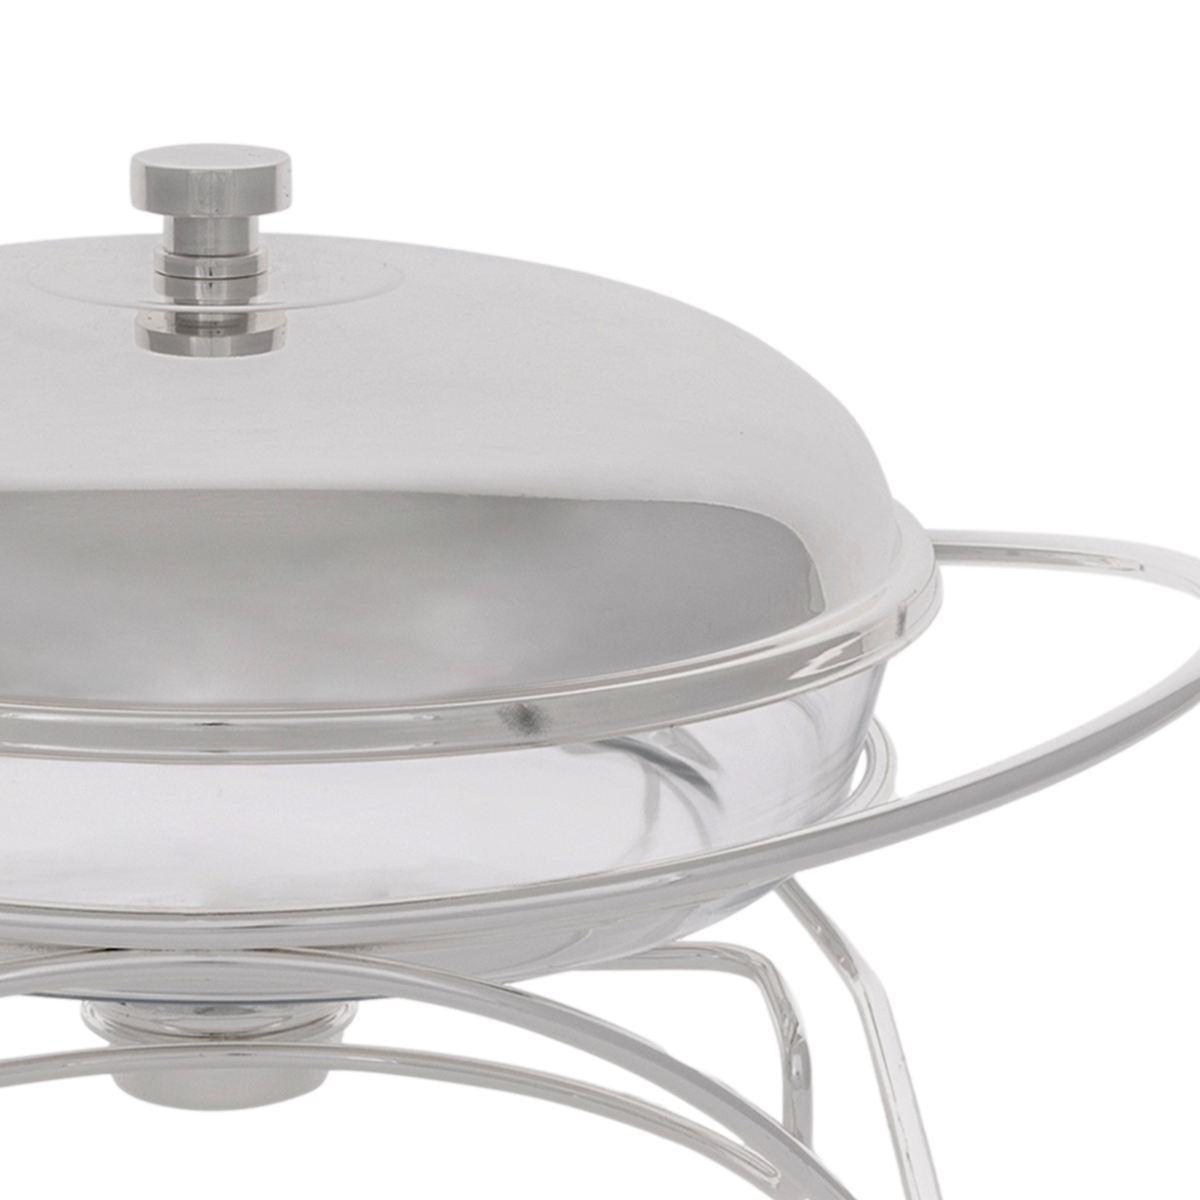 OVAL CHAFING DISH